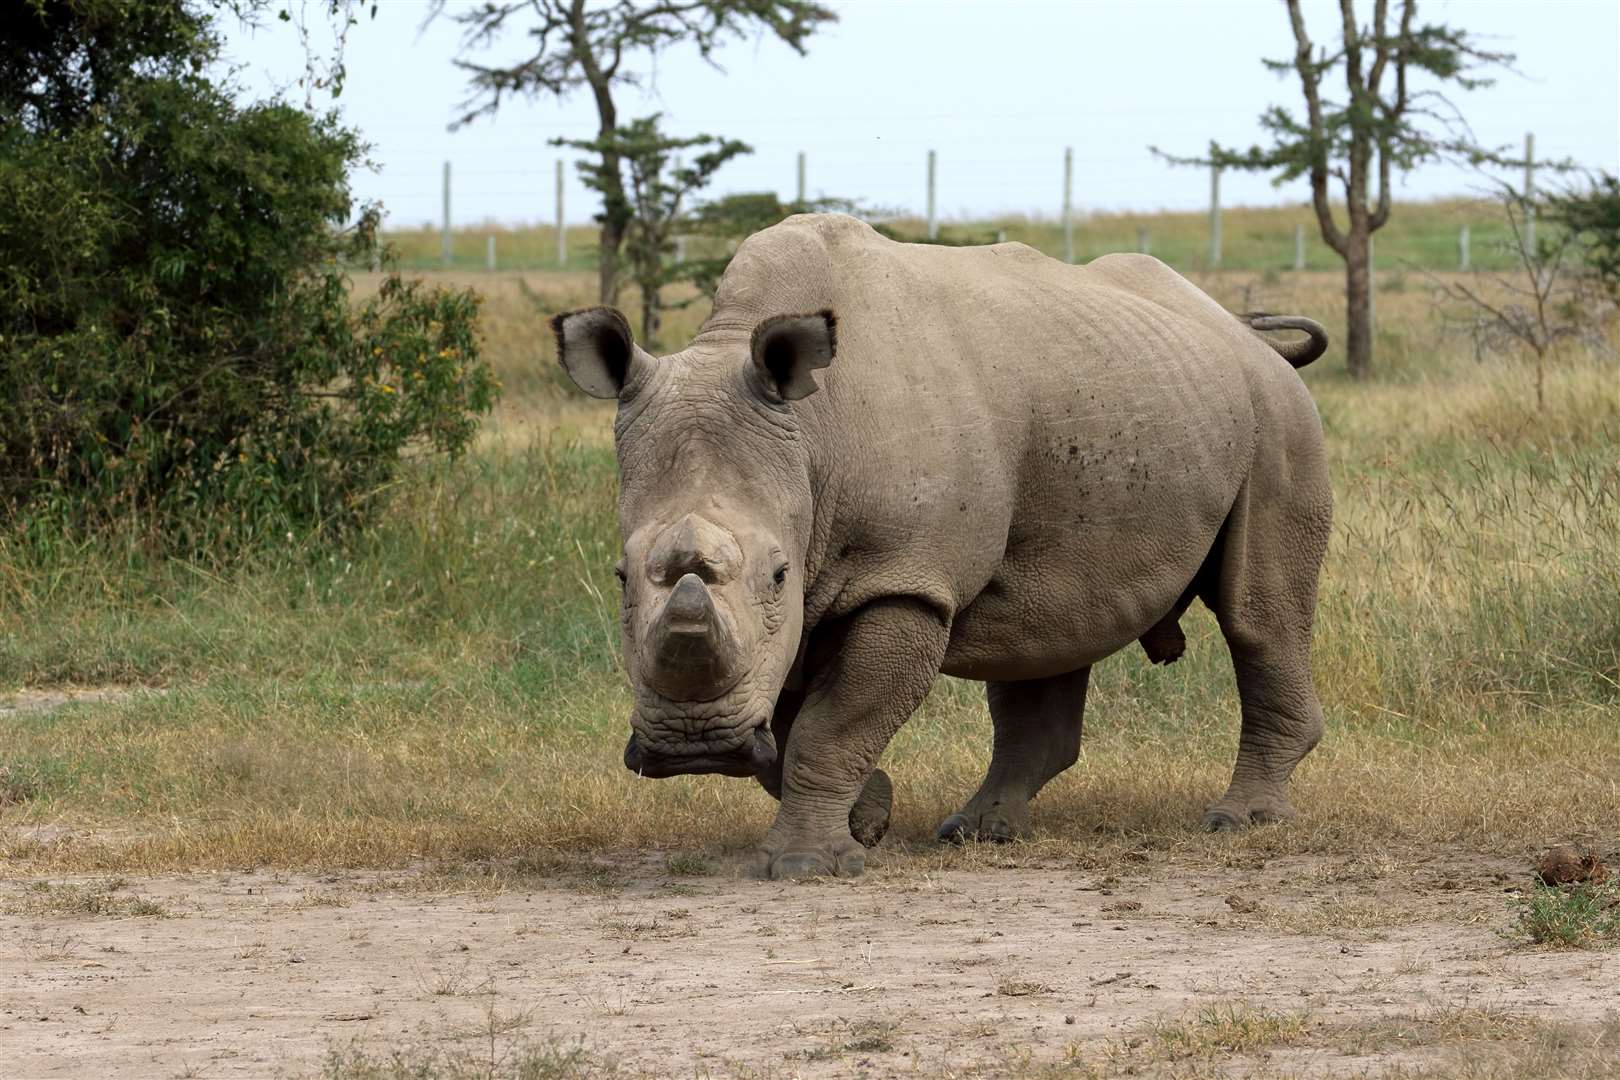 Sudan: the last male Northern White Rhino died last year. Picture by Glyn Edmunds